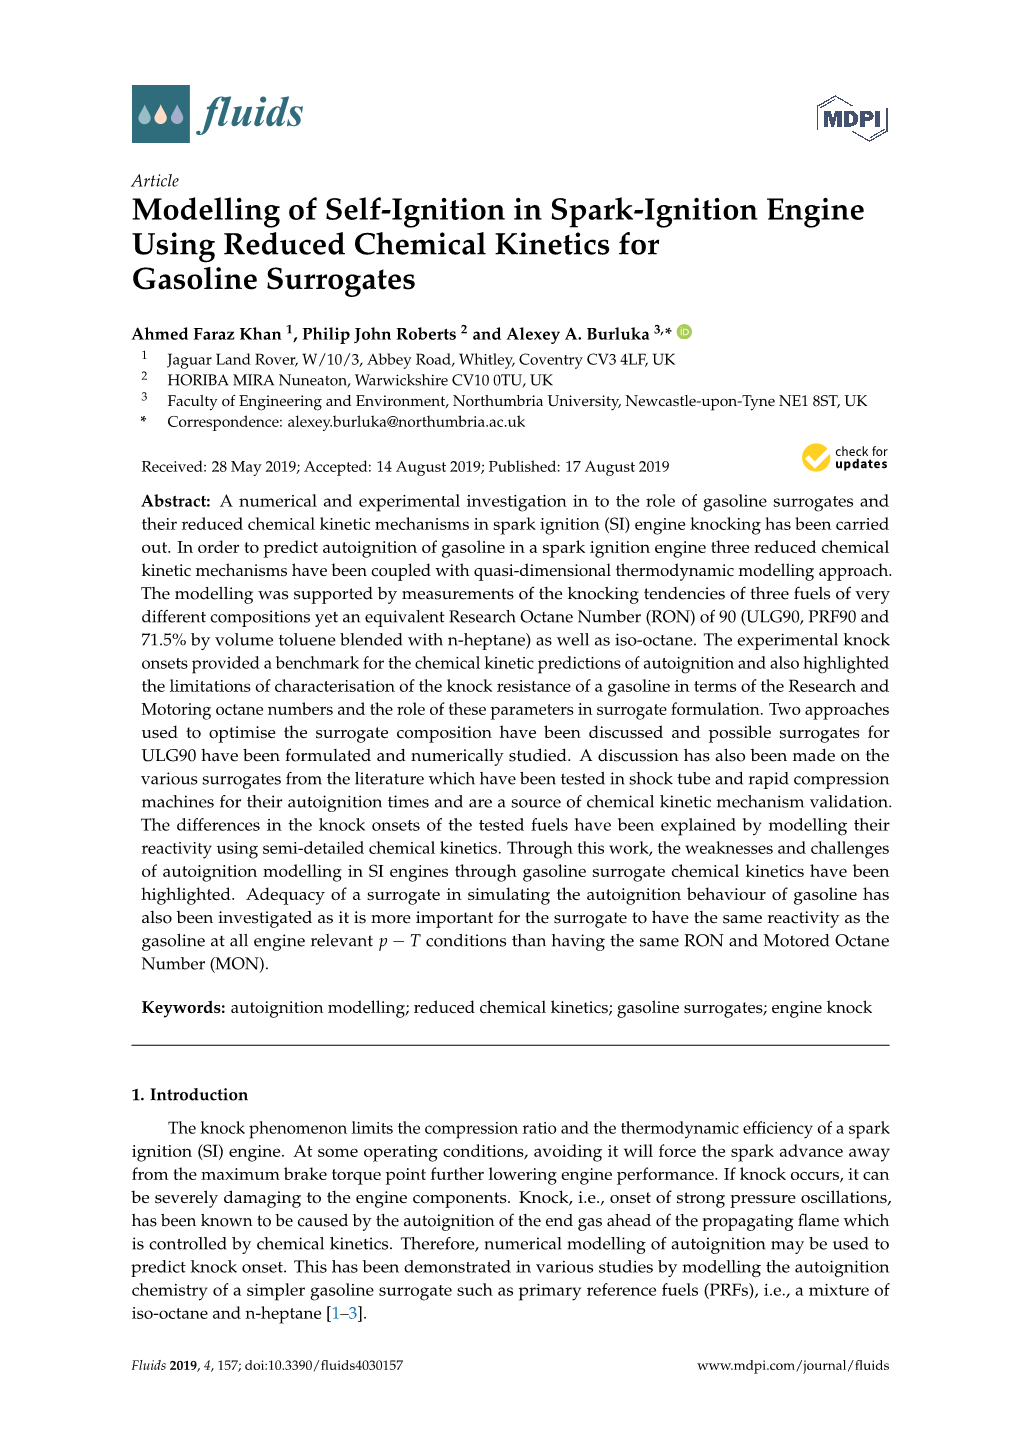 Modelling of Self-Ignition in Spark-Ignition Engine Using Reduced Chemical Kinetics for Gasoline Surrogates